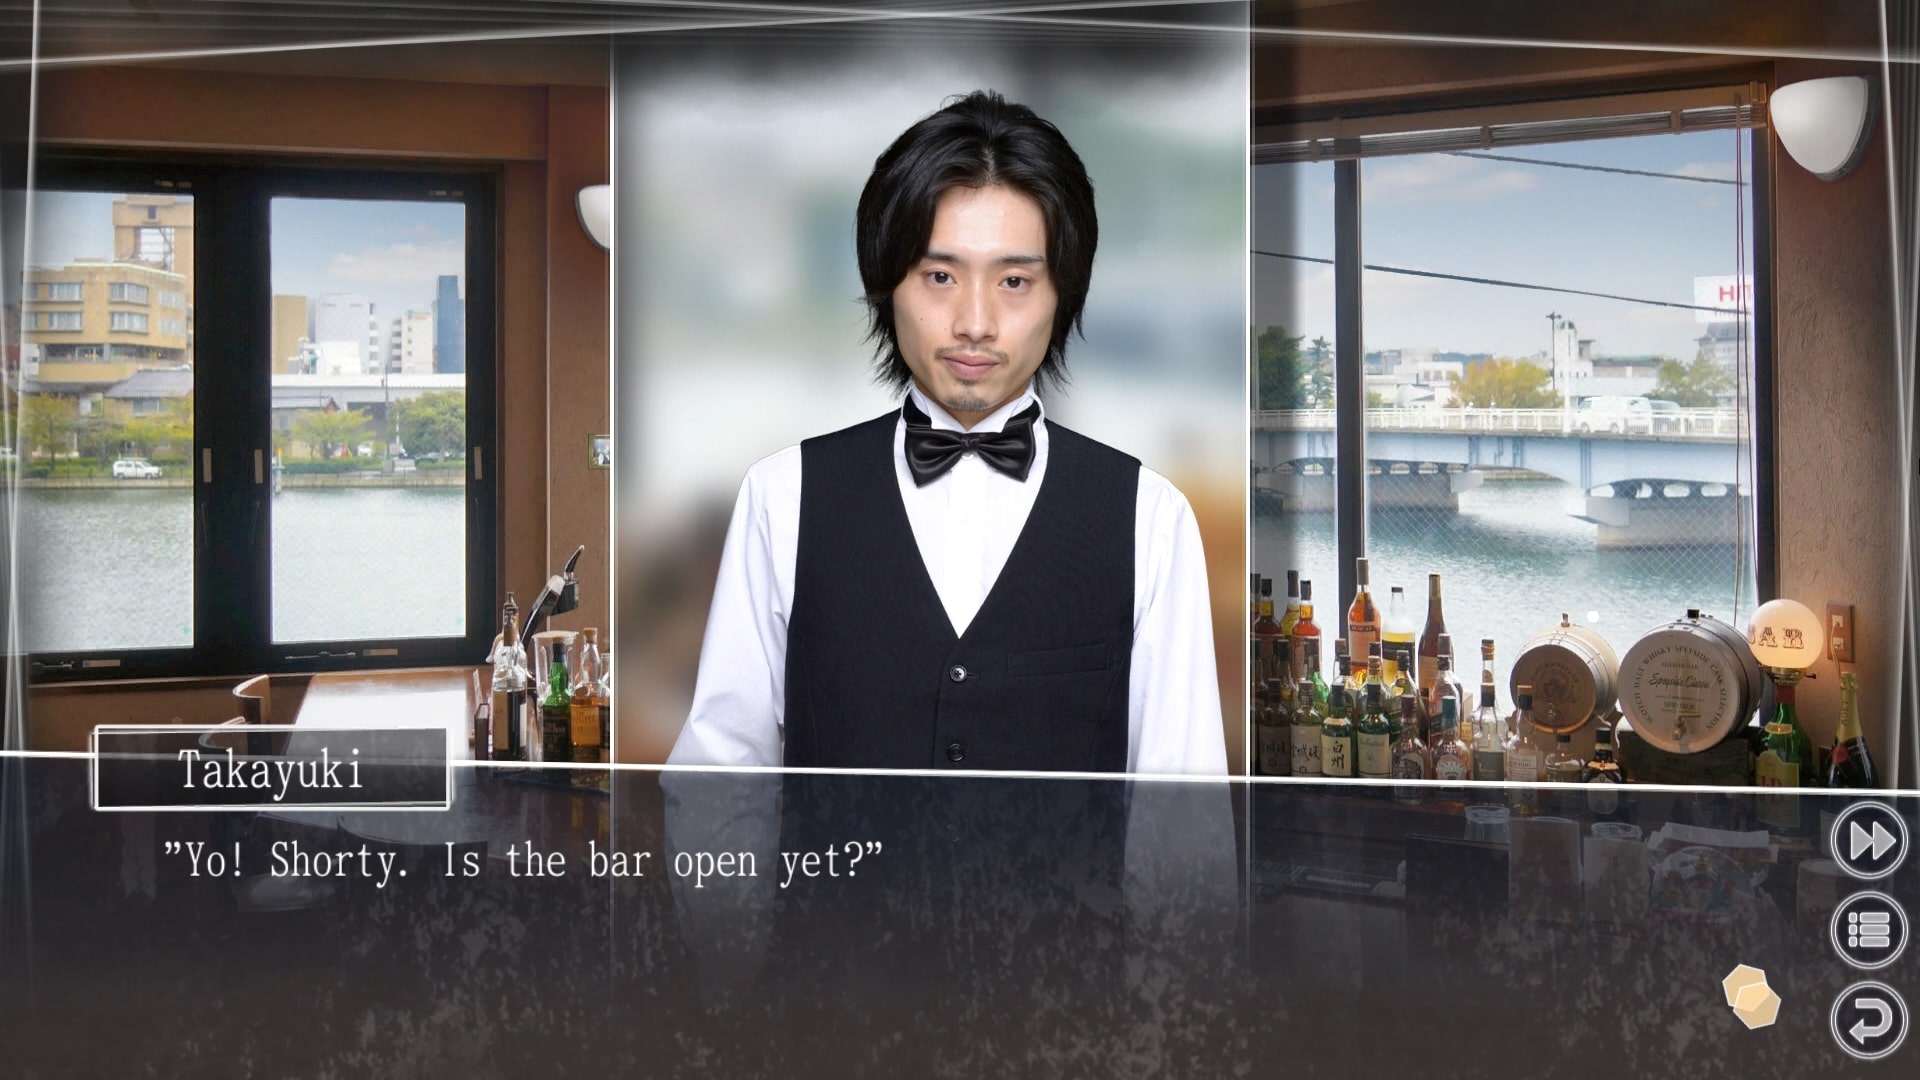 Root Letter Last Answer Additional Scenarios for Root Letter Last Answer Walkthrough - Scenario 3: The Nakamura Bar Special Cocktail - A888EF2